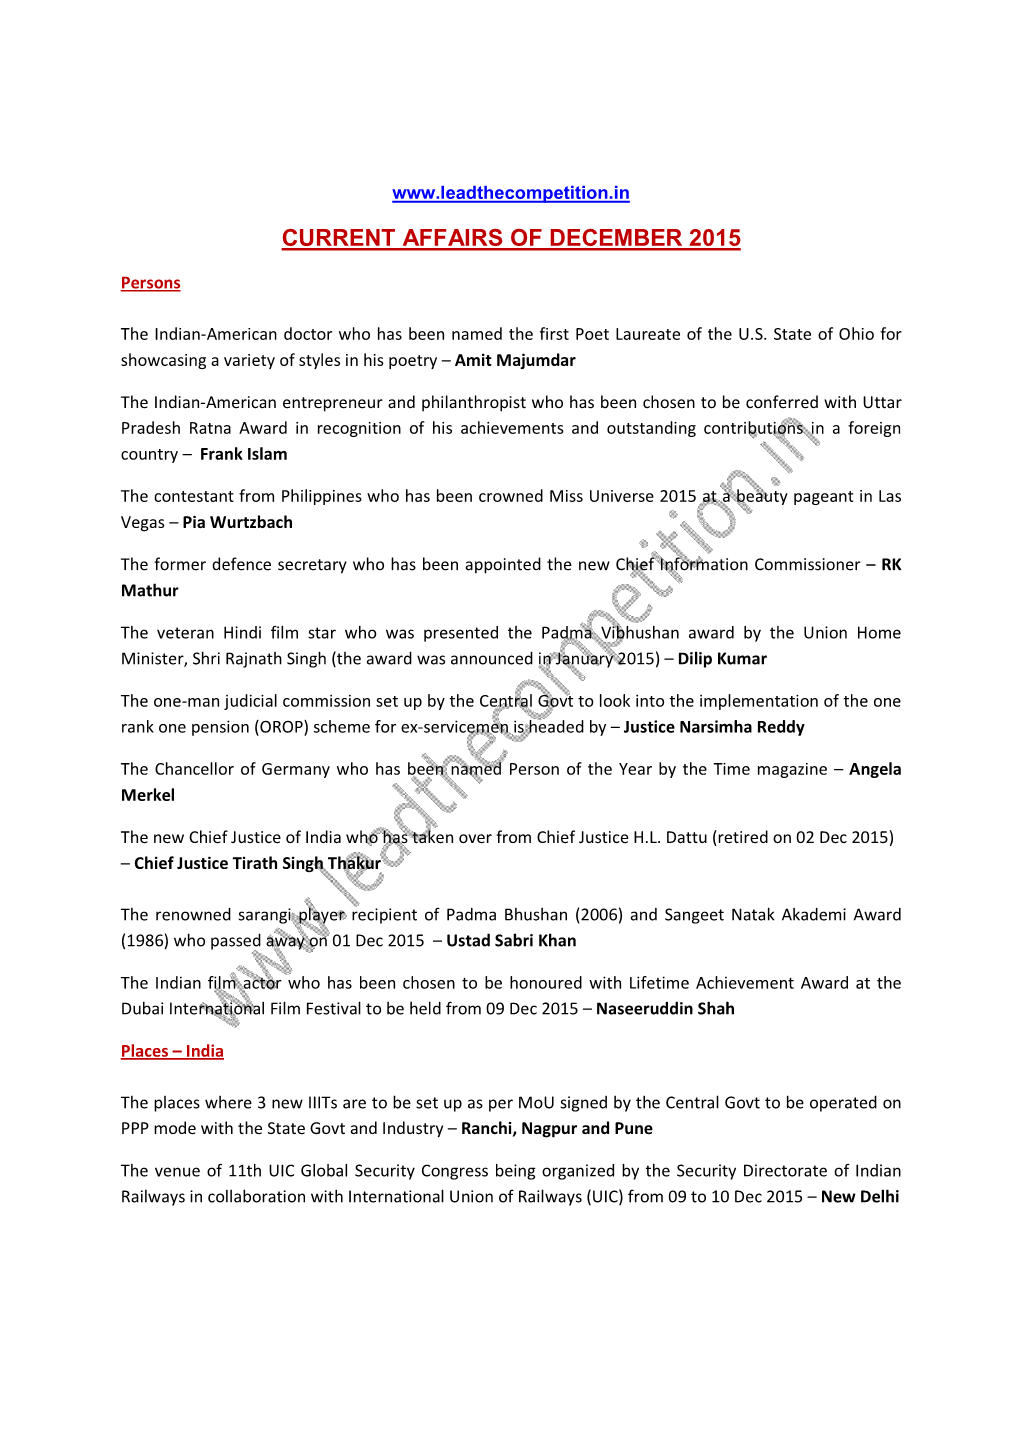 Current Affairs of December 2015